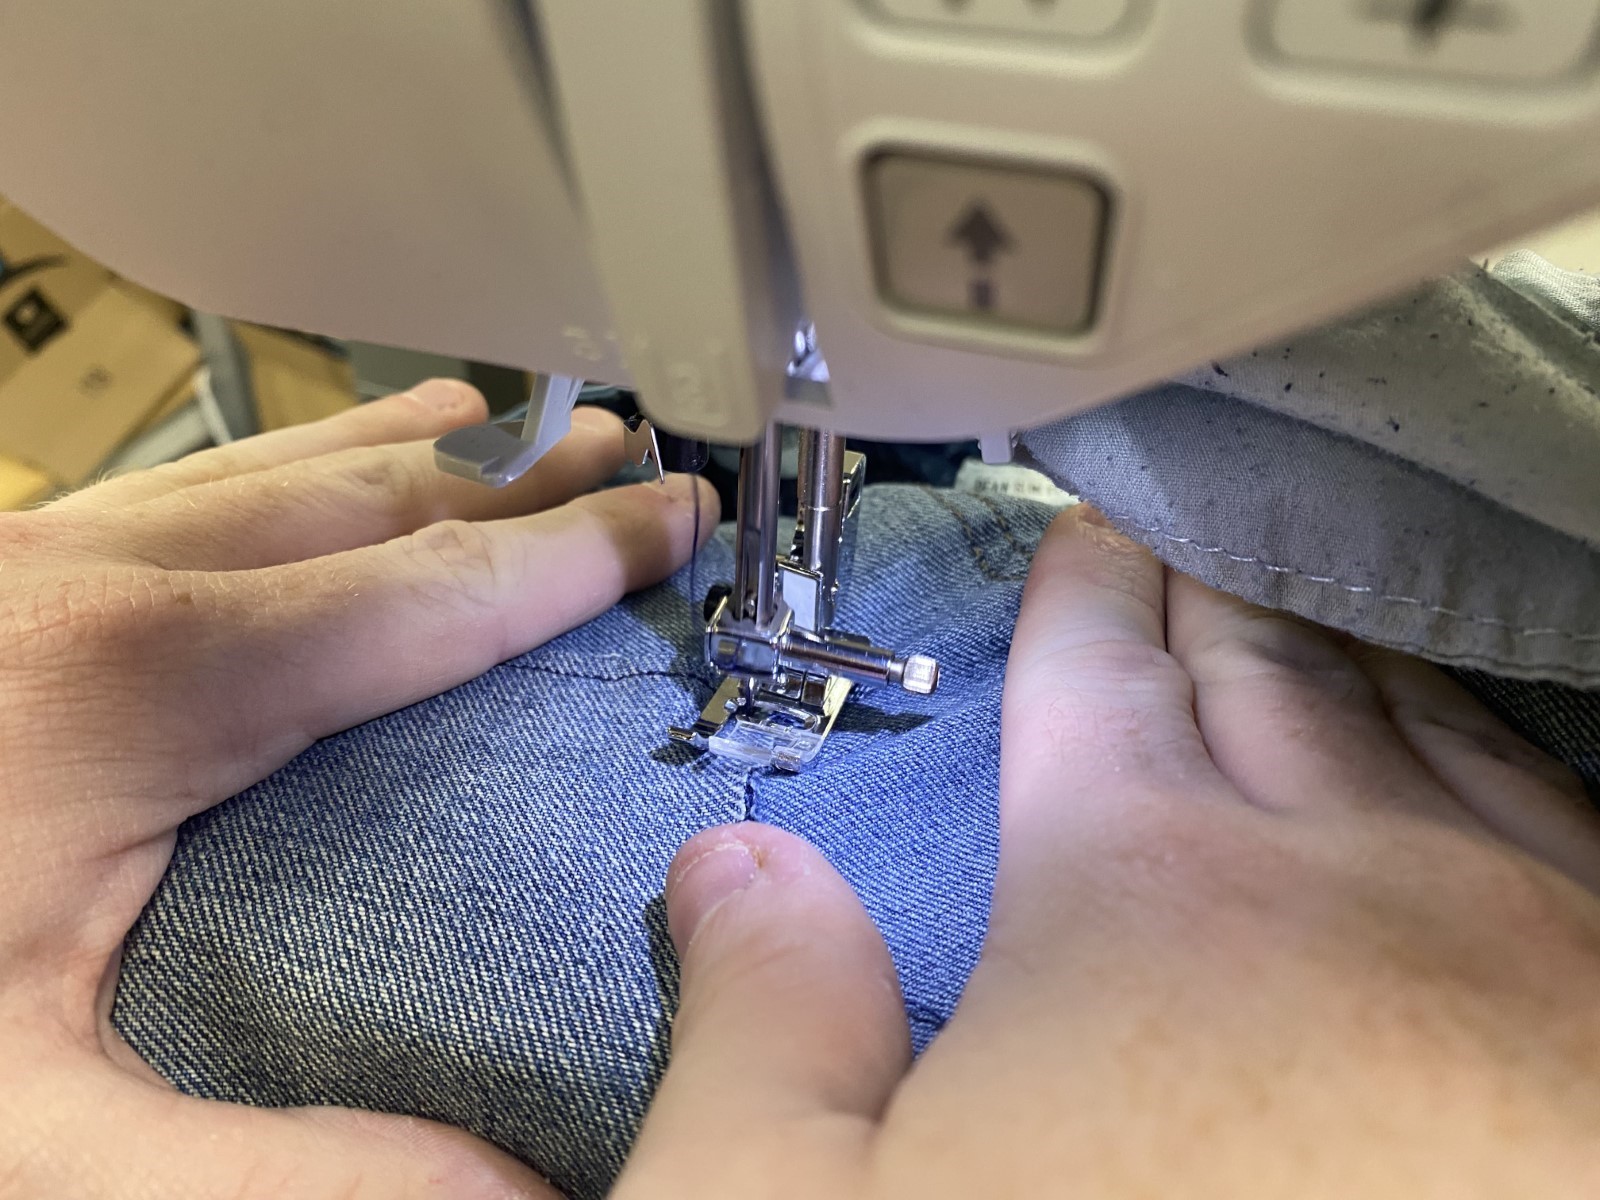 Denim jeans going through the sewing machine